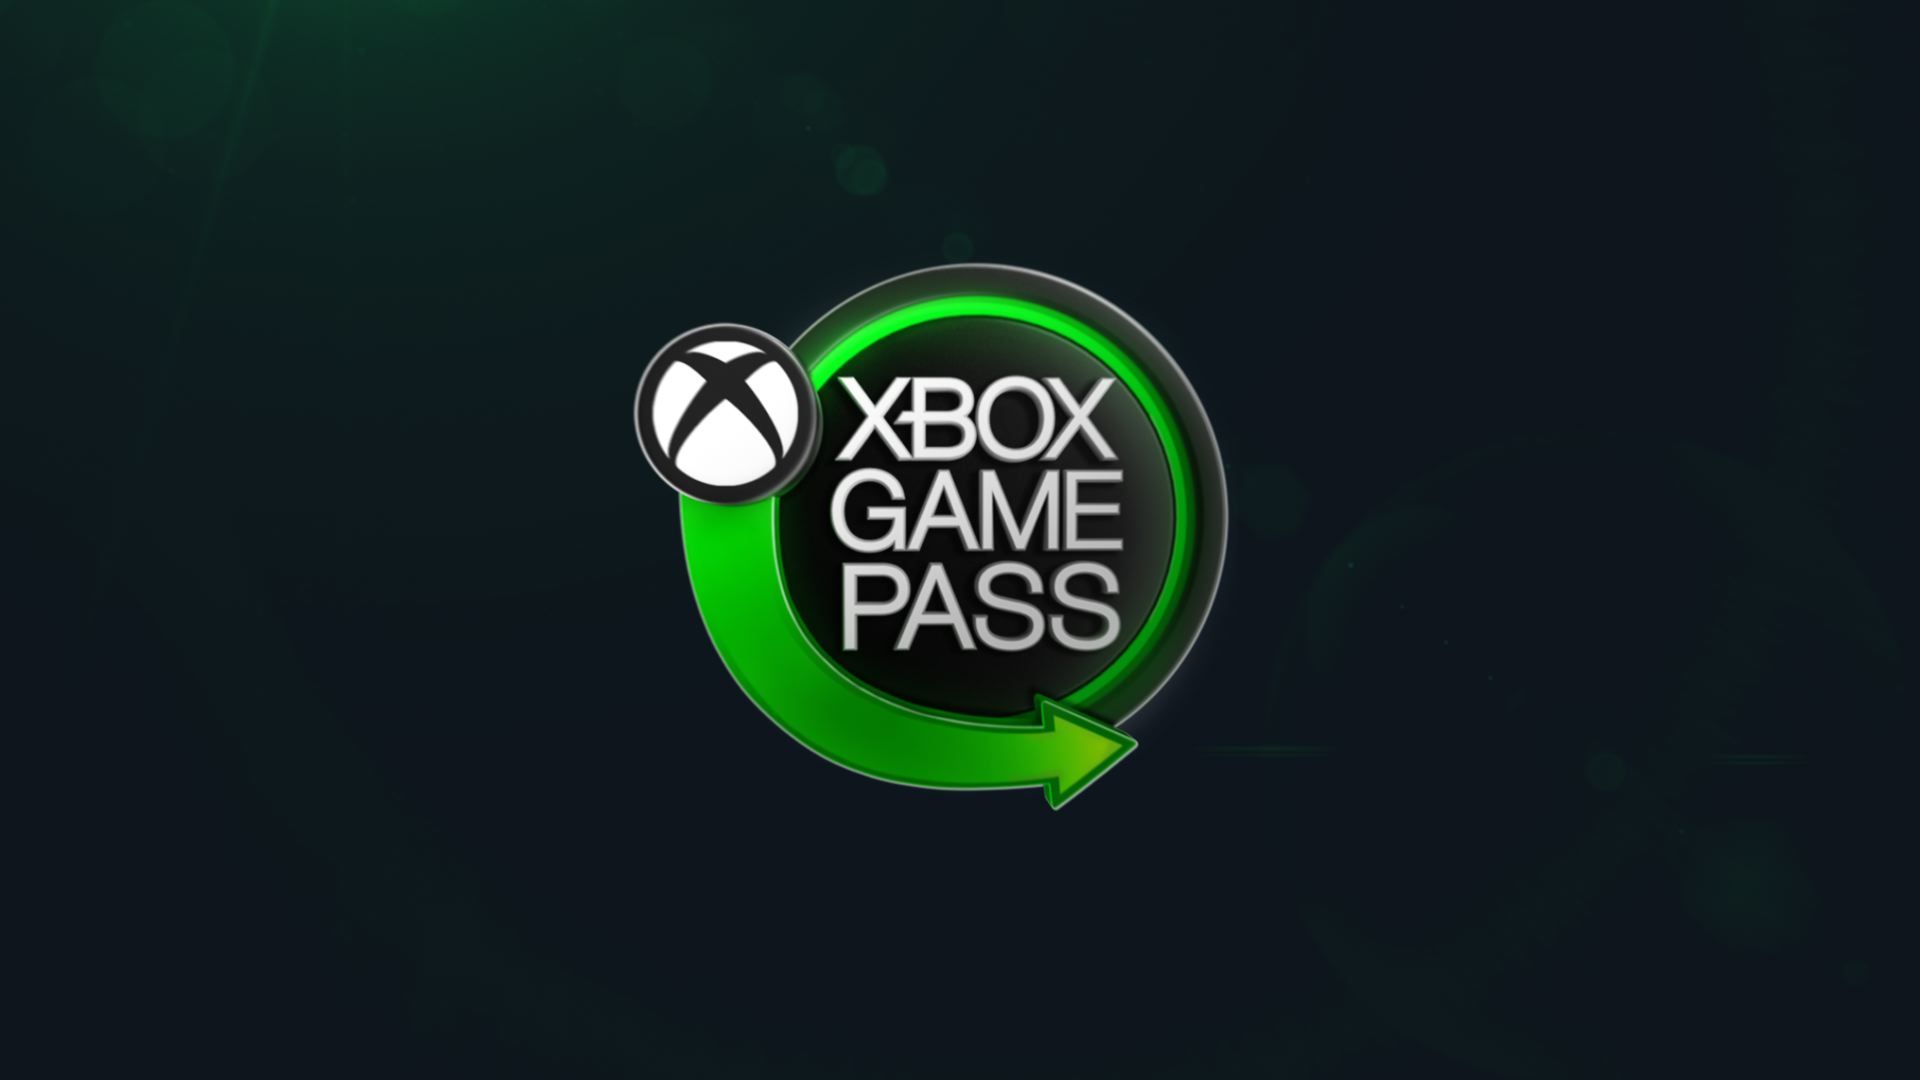 is assassin's creed on xbox game pass